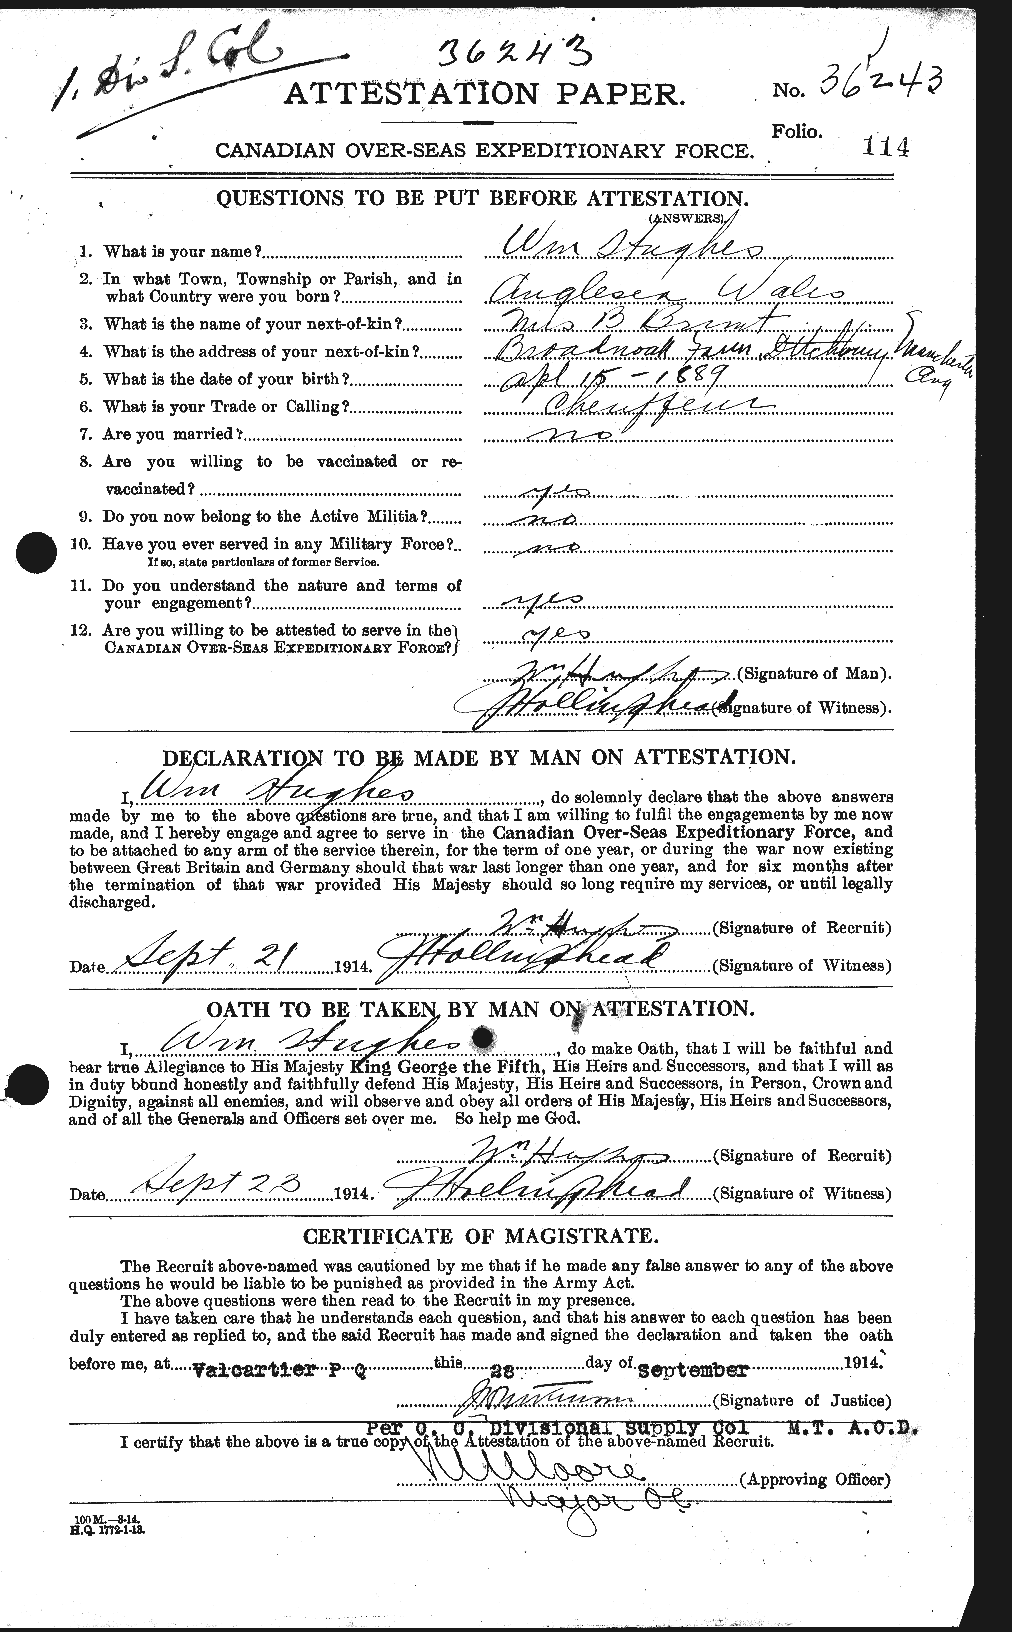 Personnel Records of the First World War - CEF 405883a